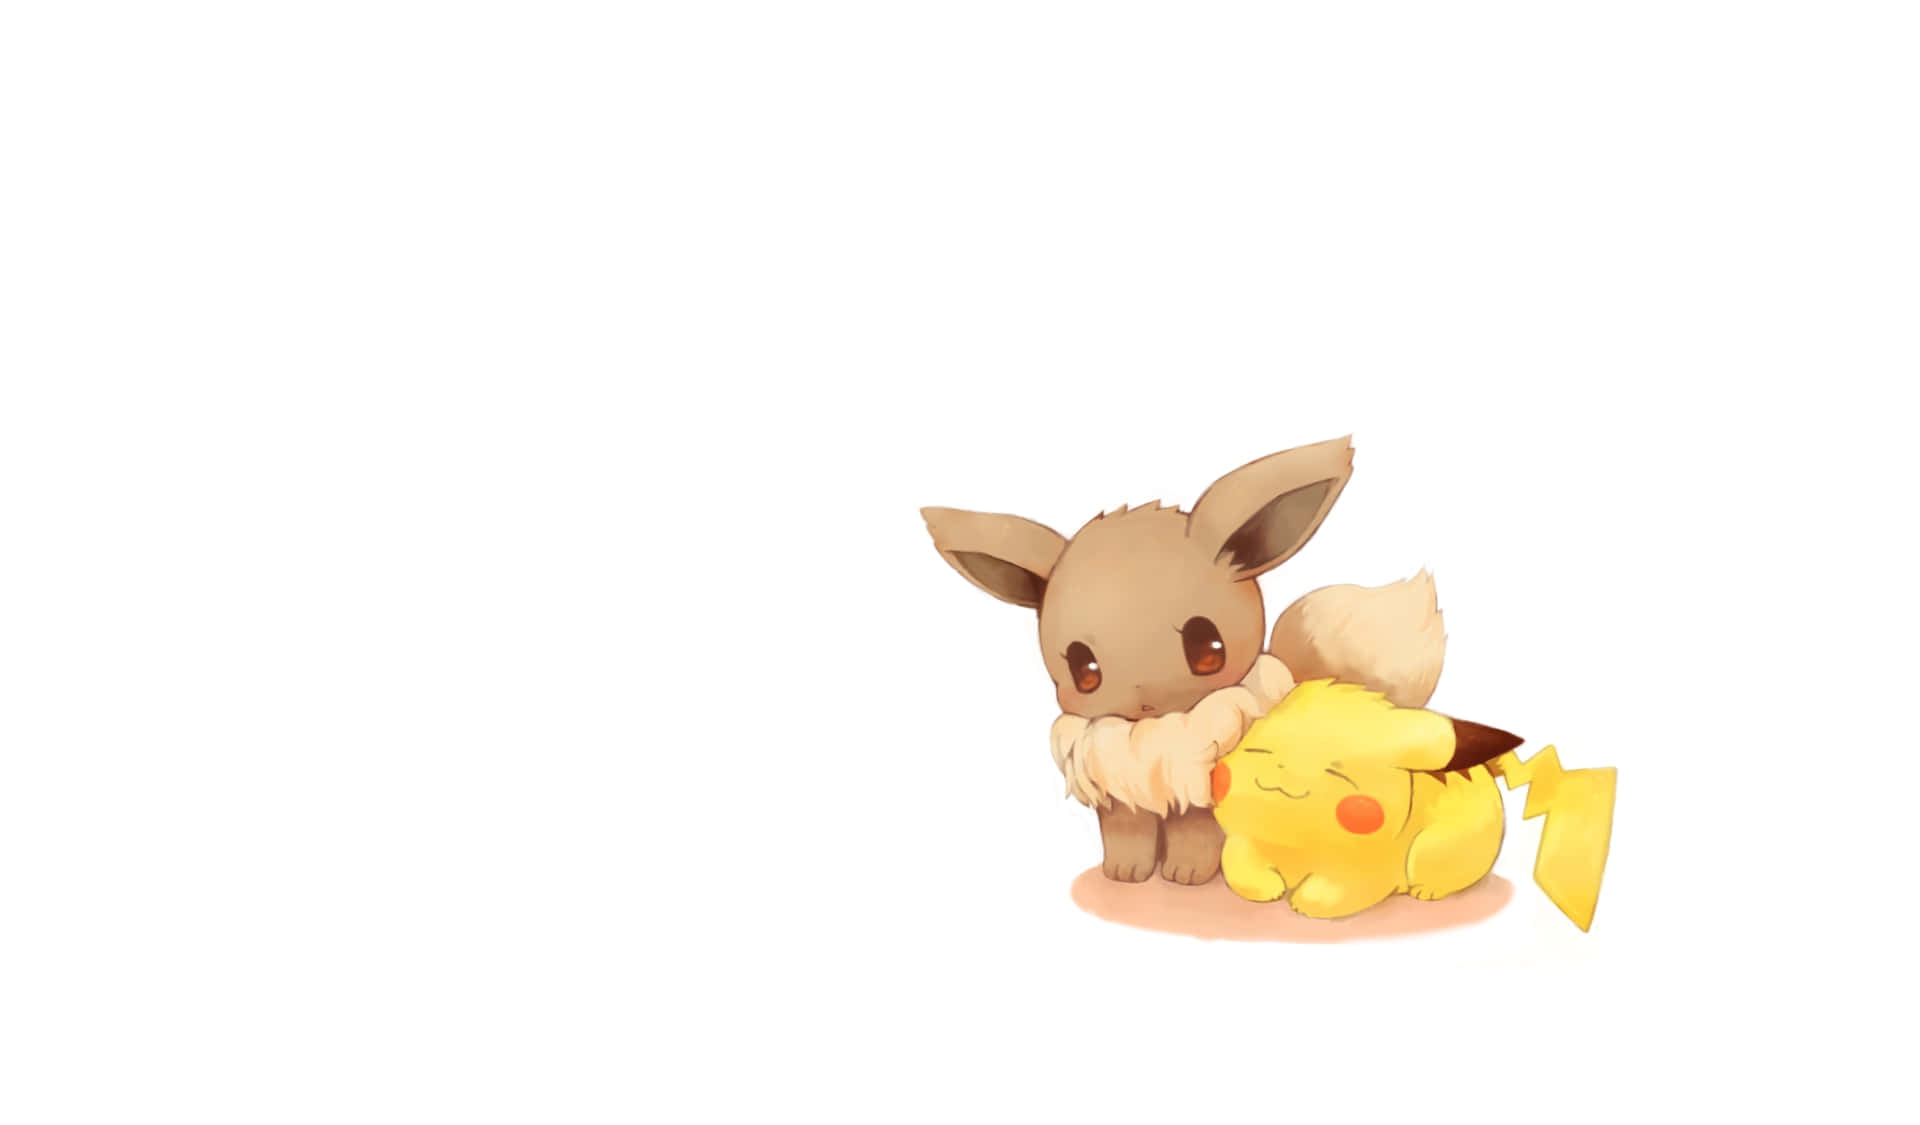 "The Cutest Team of Pikachu and Eevee" Wallpaper